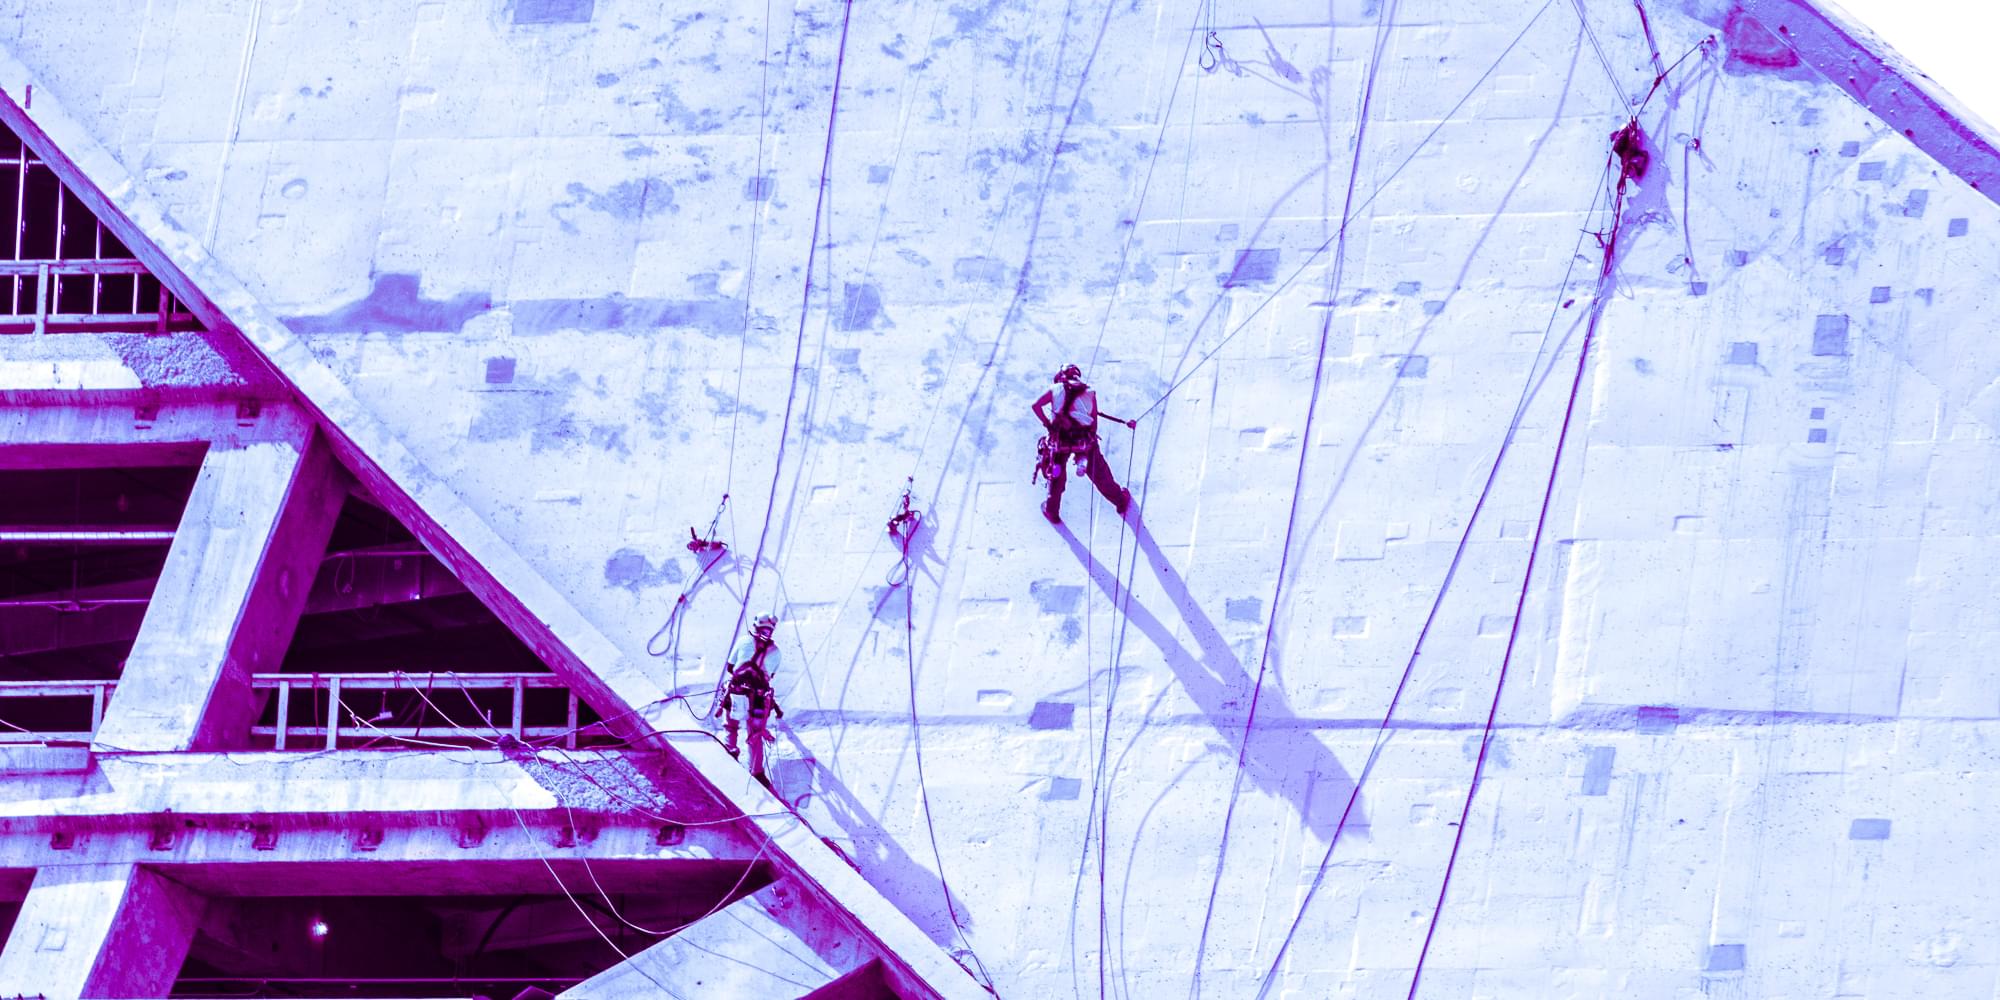 A close up of construction workers rappelled on the side of the Montreal Olympic Stadium. The outline of the stadium can not be seen. The image is heavily tinted purple.